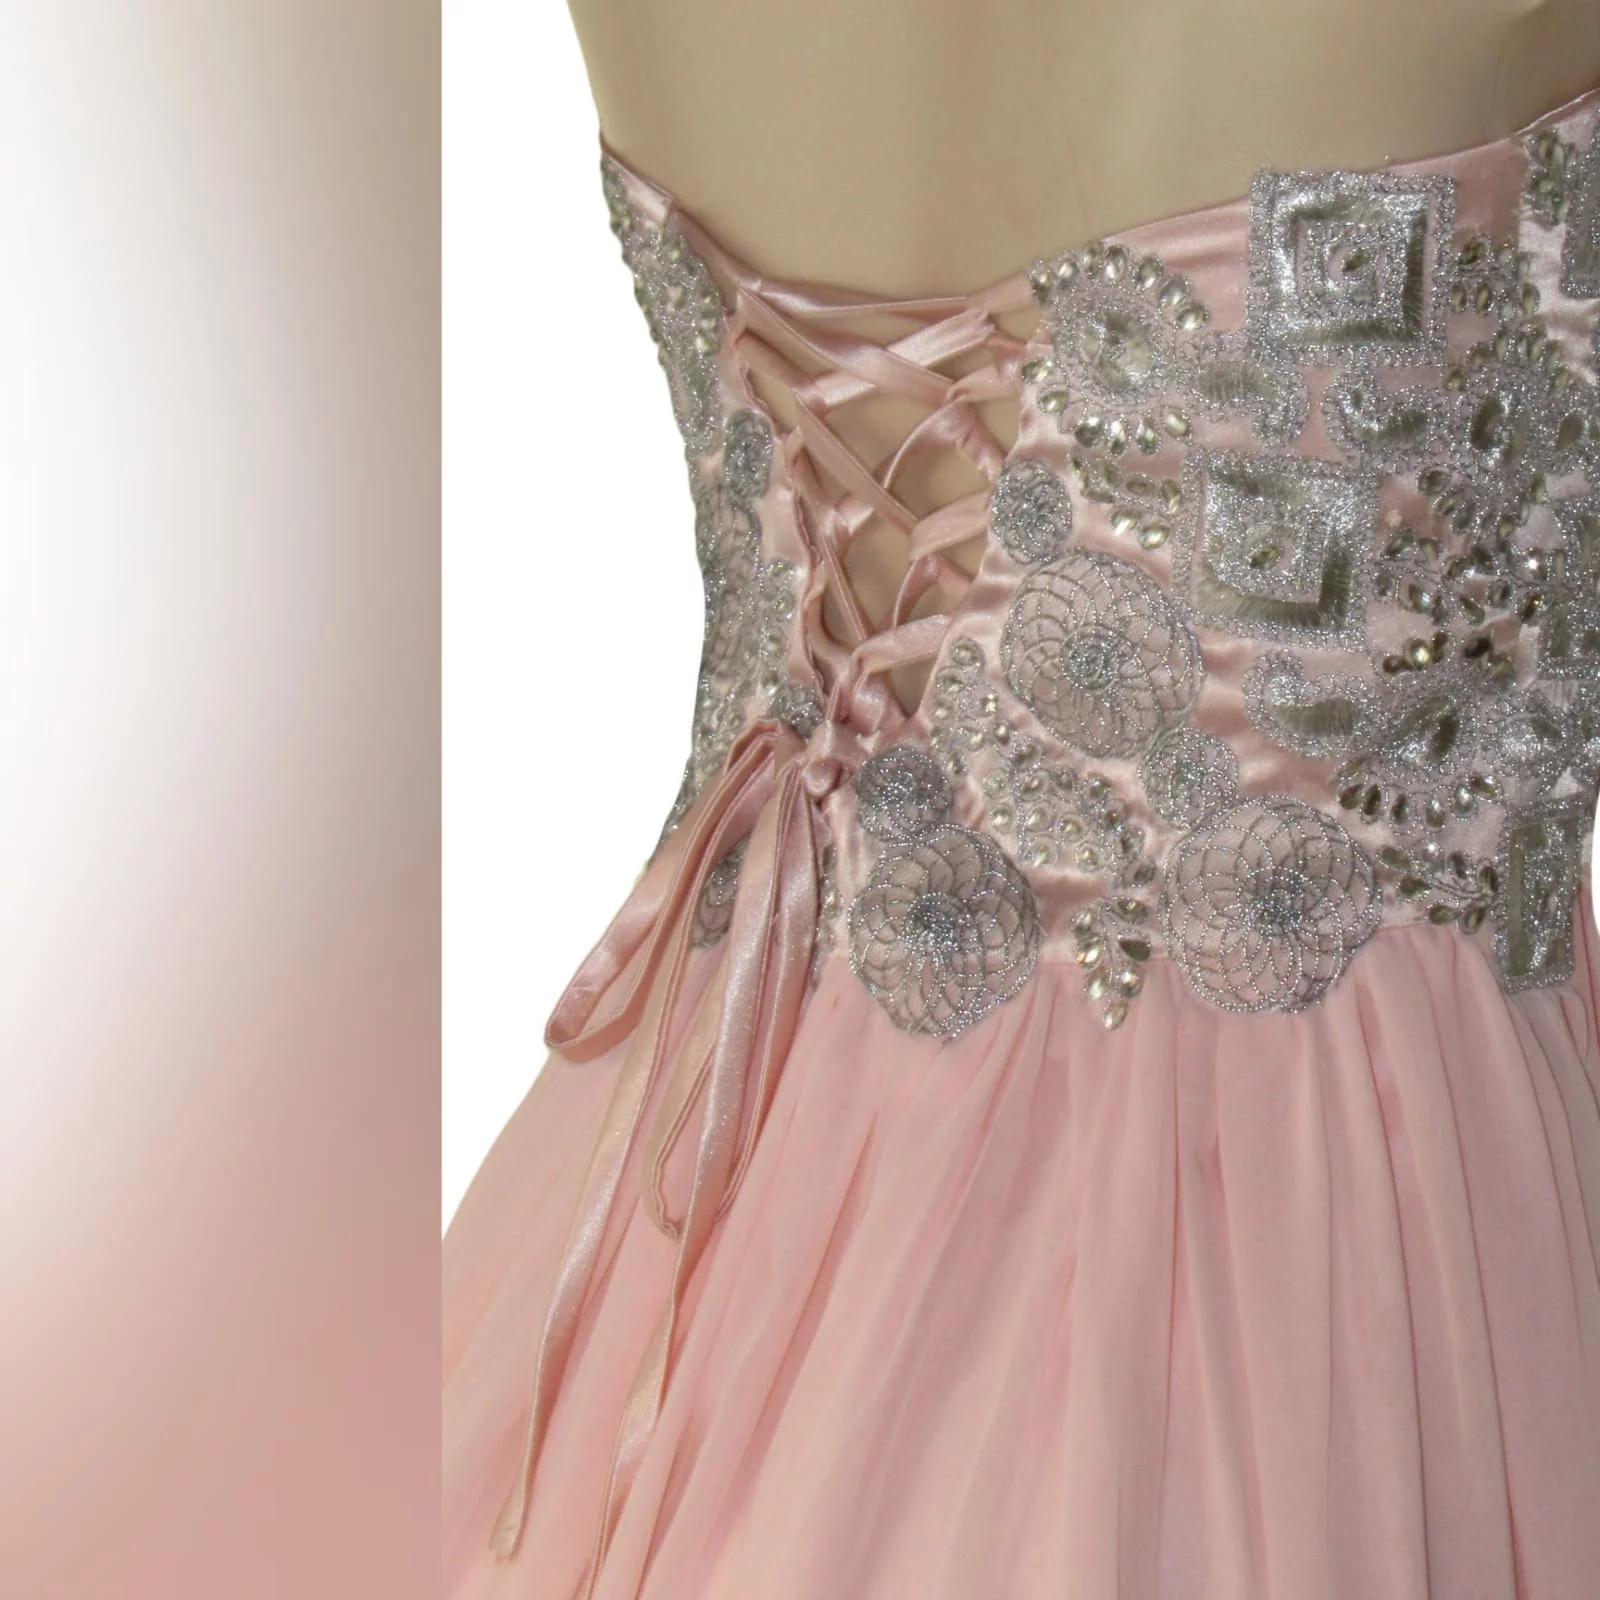 Peach and silver fun prom dress 5 peach and silver fun prom dress. Bodice detailed with appliques and beads, with a lace-up back. Bottom with gathered chiffon and an overlayer opened in front.